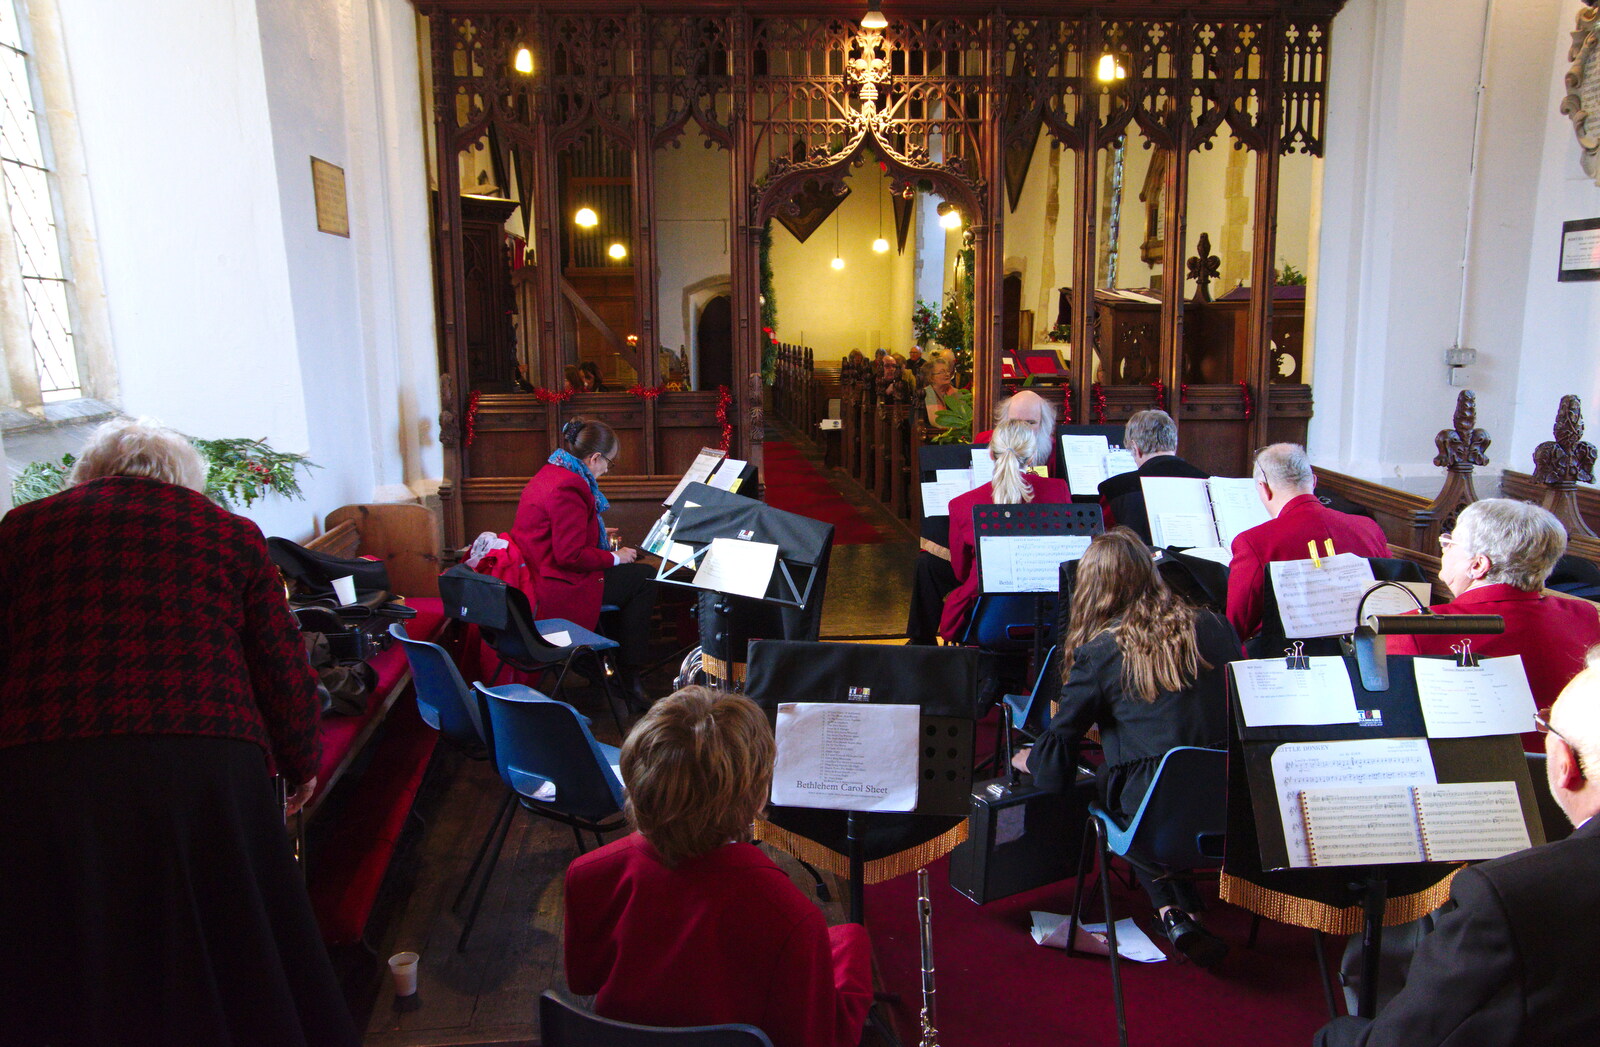 The band in the choir at St. Mary Magdalene from The GSB at Thornham Magna and Yaxley Cherry Tree, Suffolk - 15th December 2019